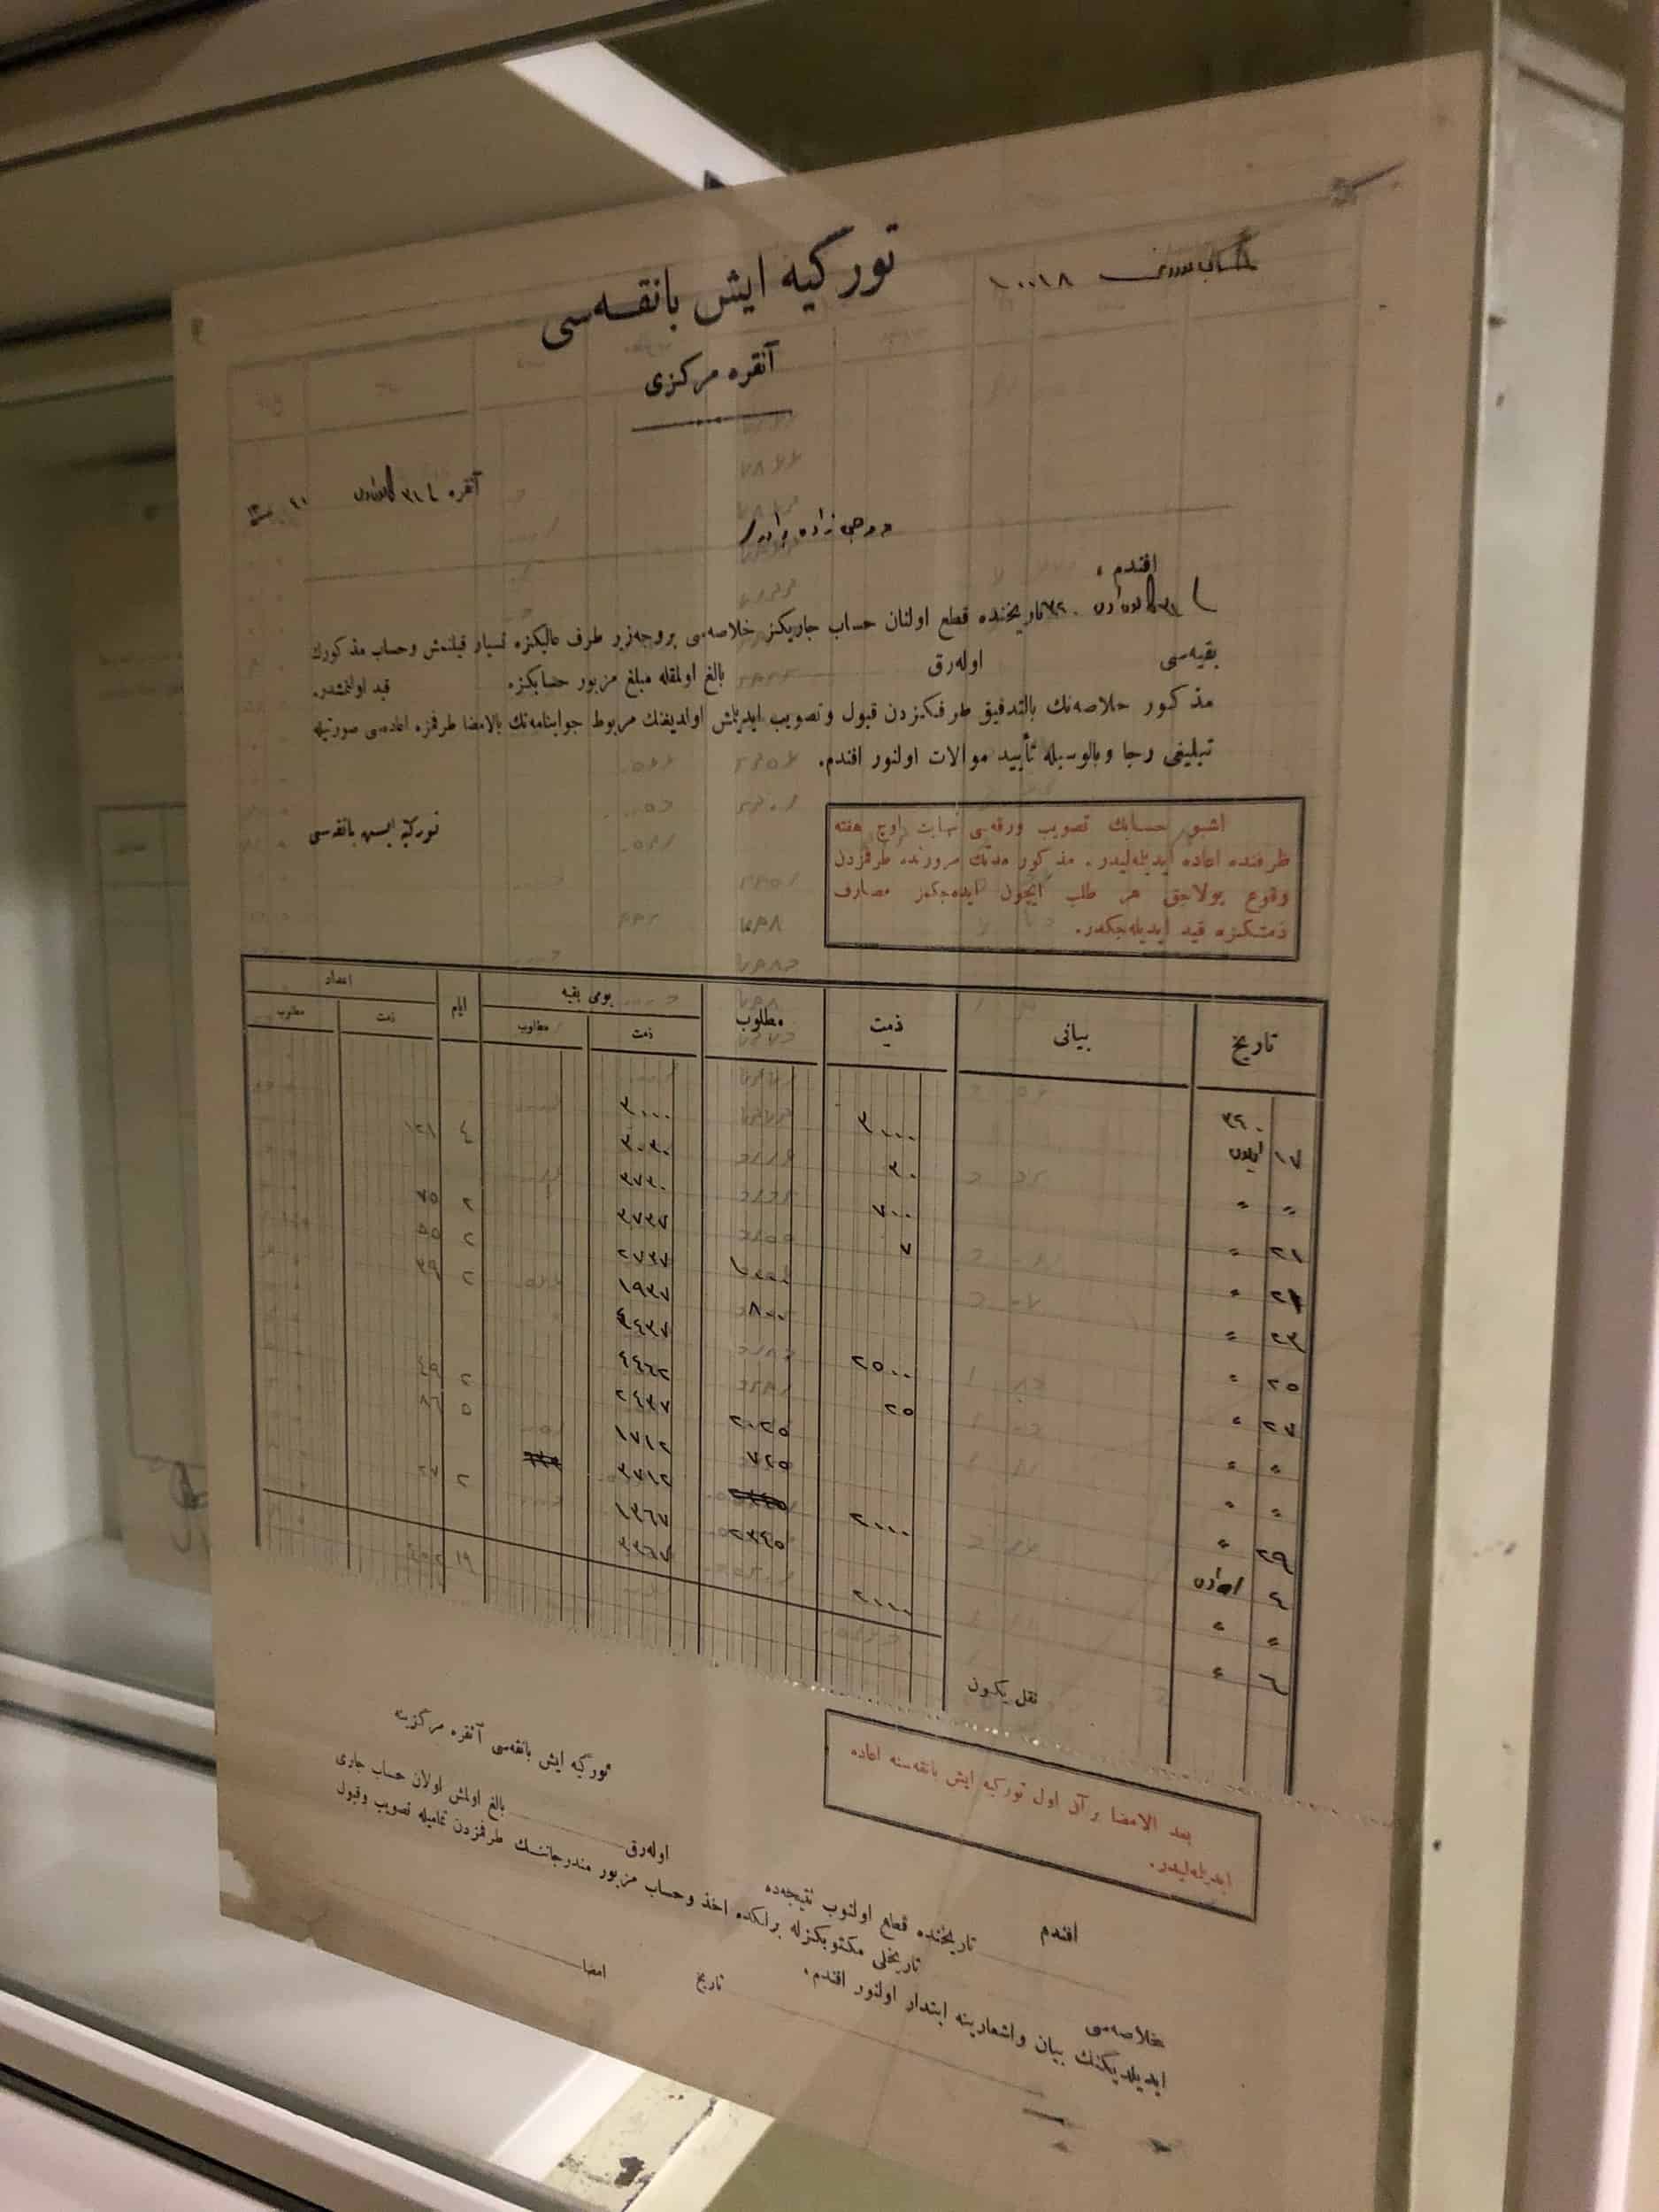 Ledger in Ottoman Turkish at the İşbank Museum